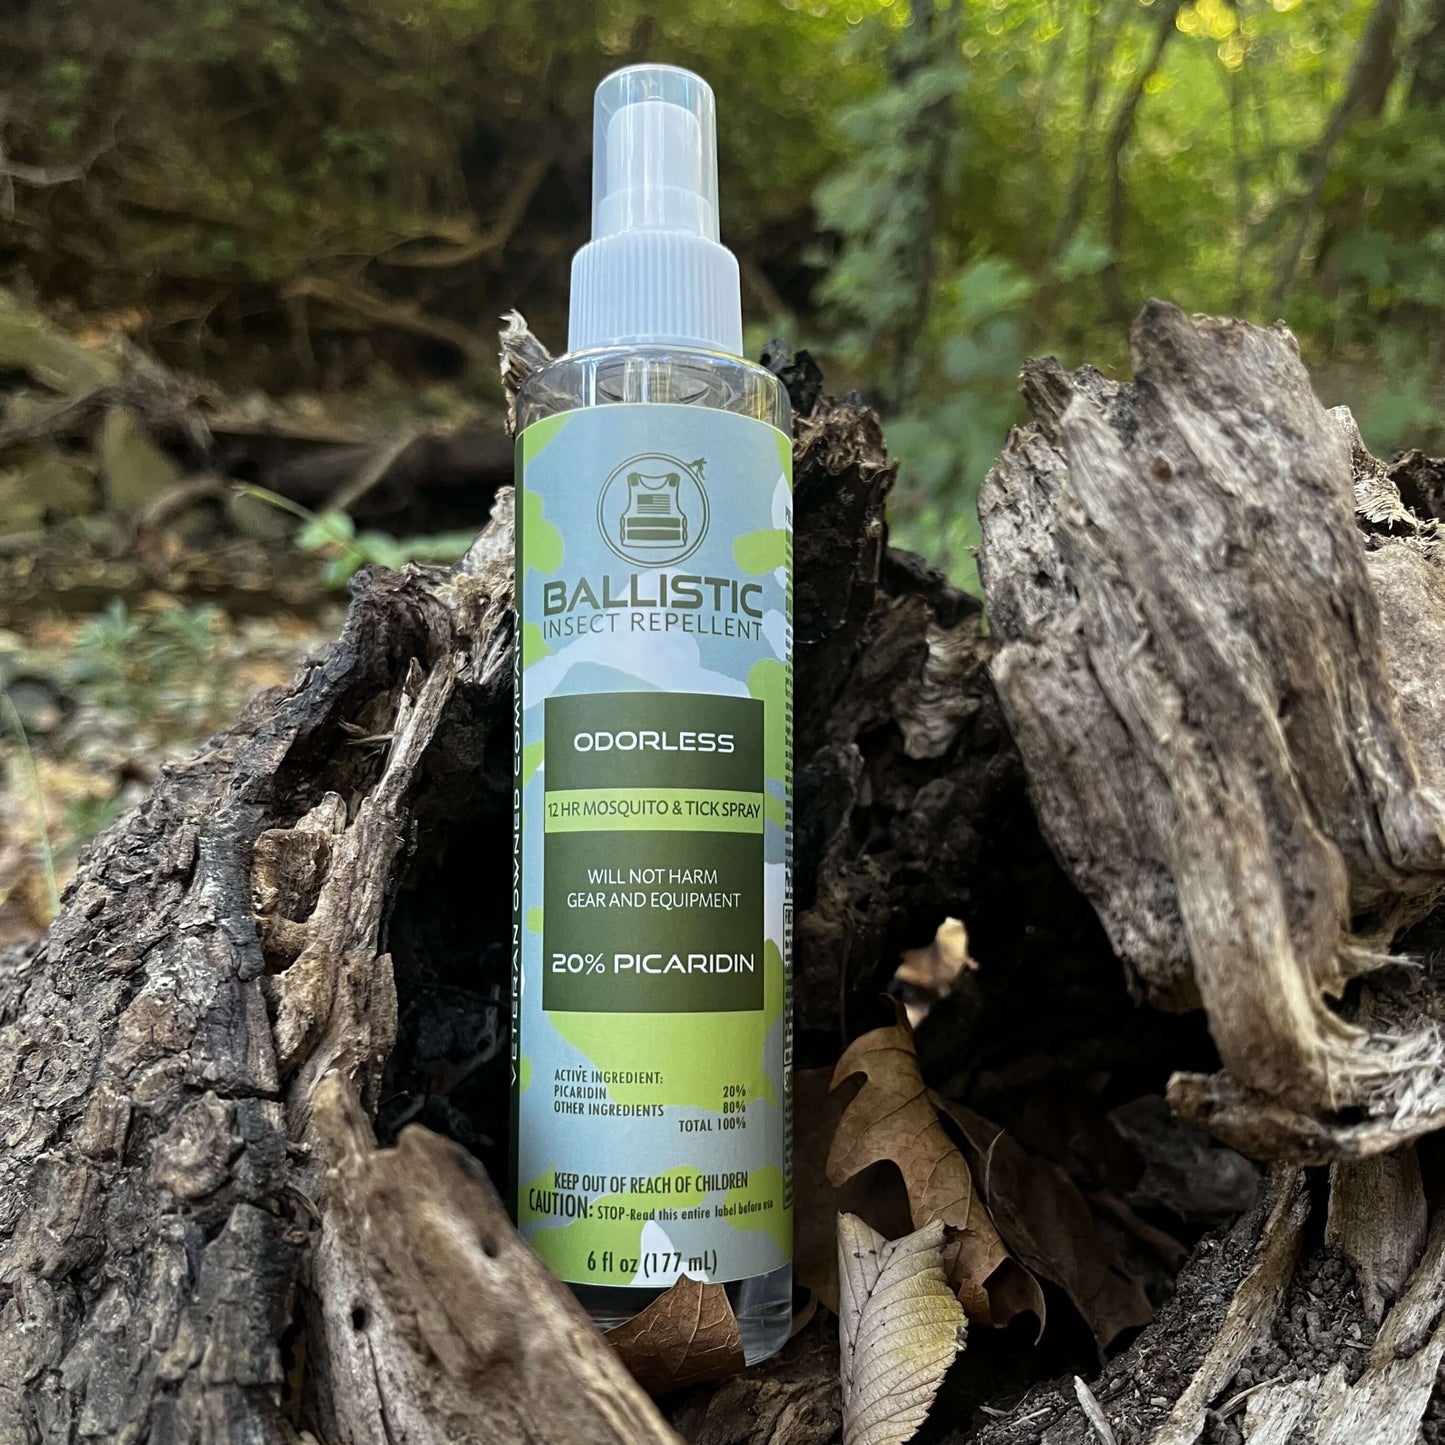 6 ounce bottle of Ballistic Insect Repellent outdoors in the woods